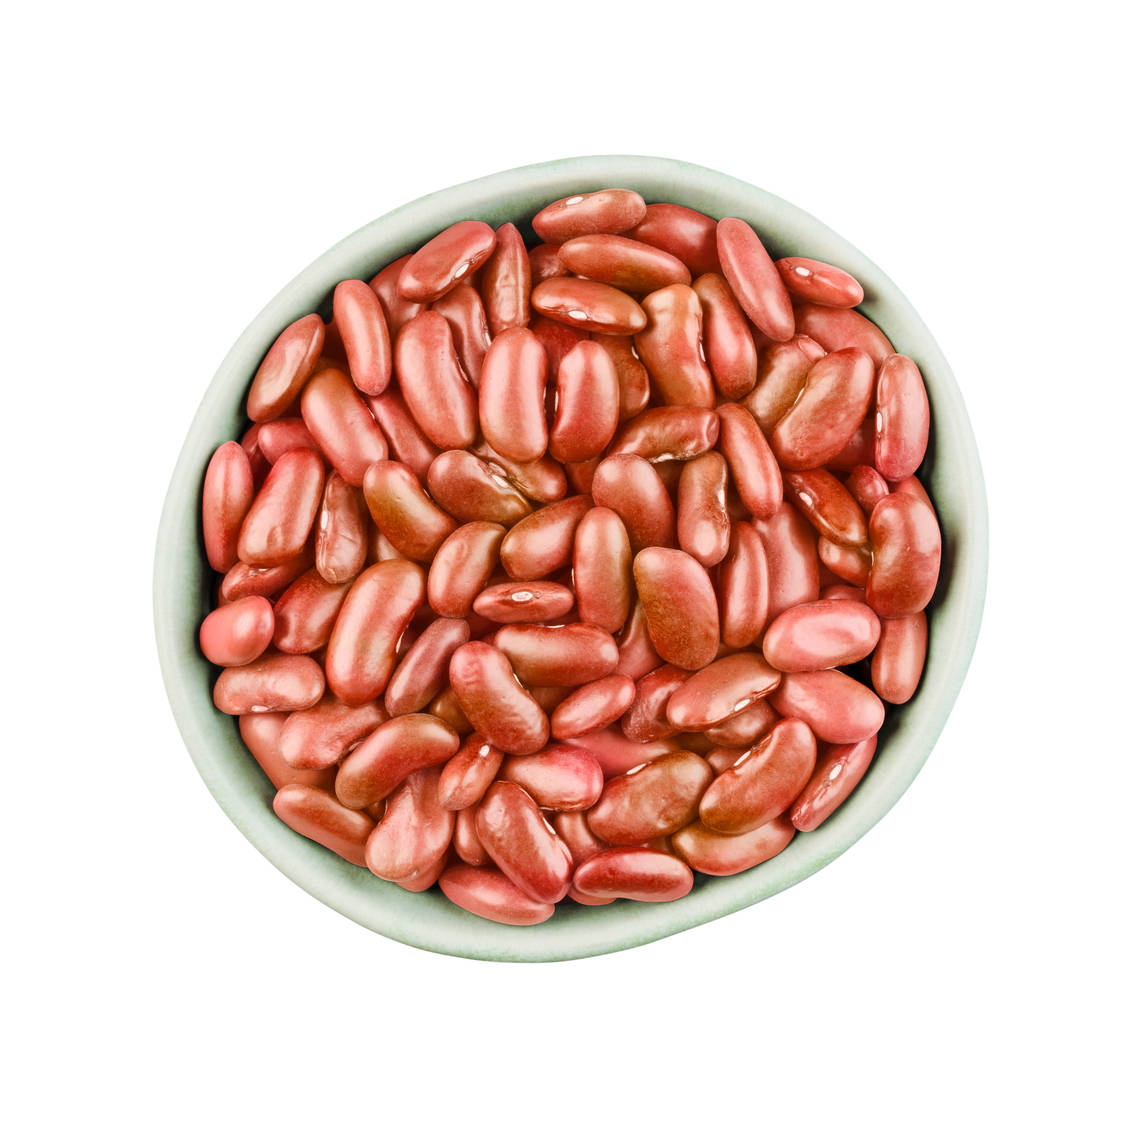 Light red kidney beans are large beans with a distinctive kidney-shape and a reddish-pink glossy skin.